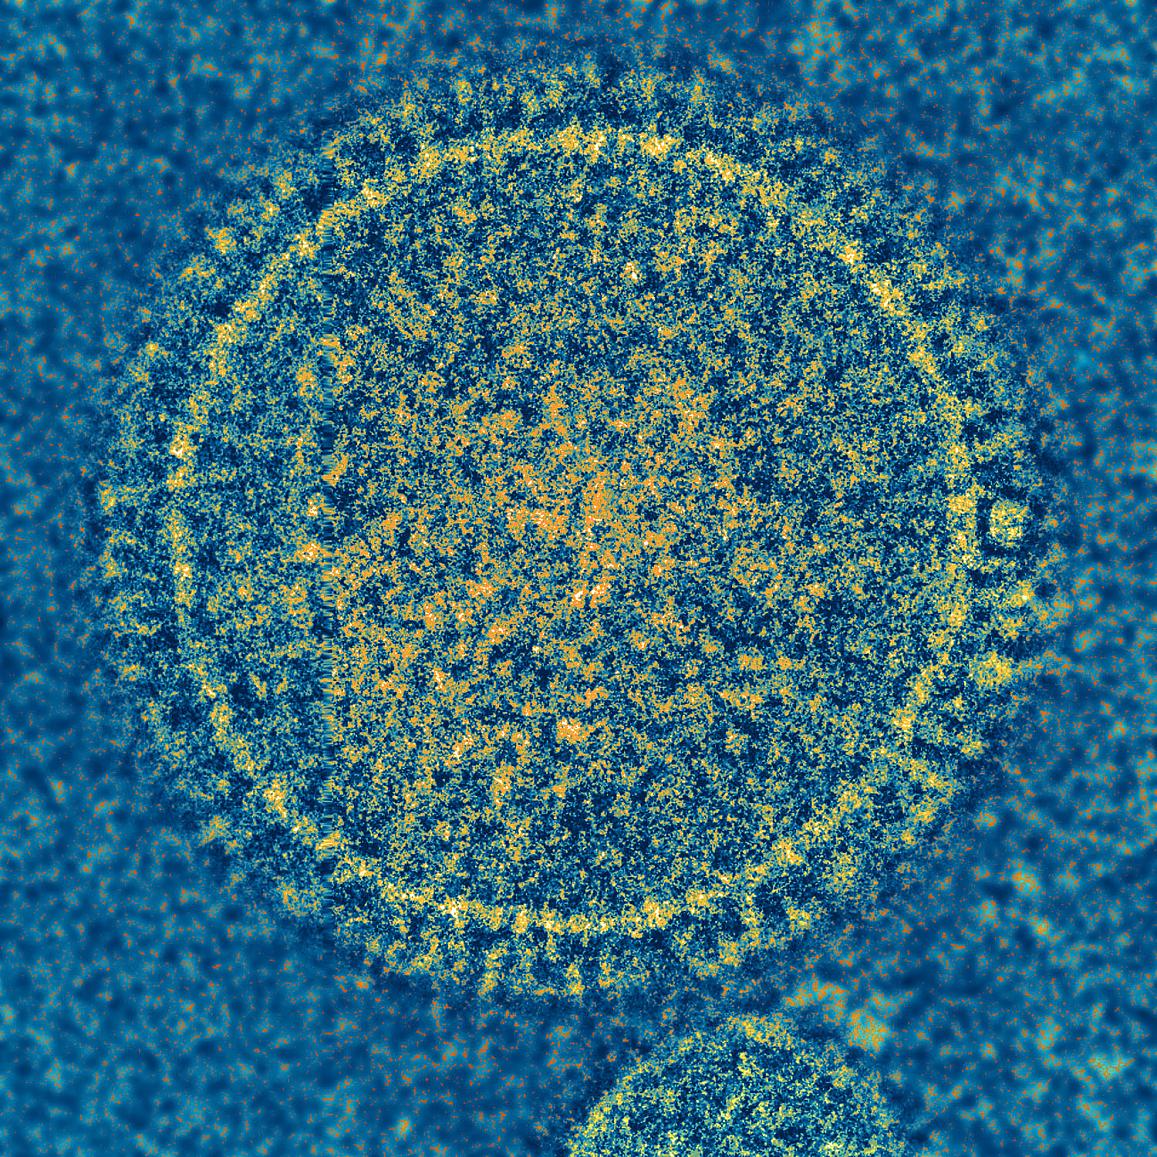 The respiratory syncytial virus (RSV) is responsible for a common childhood illness. Researchers are hopeful that results from this new study will provide a model for developing an effective human RSV vaccine. [NIH]